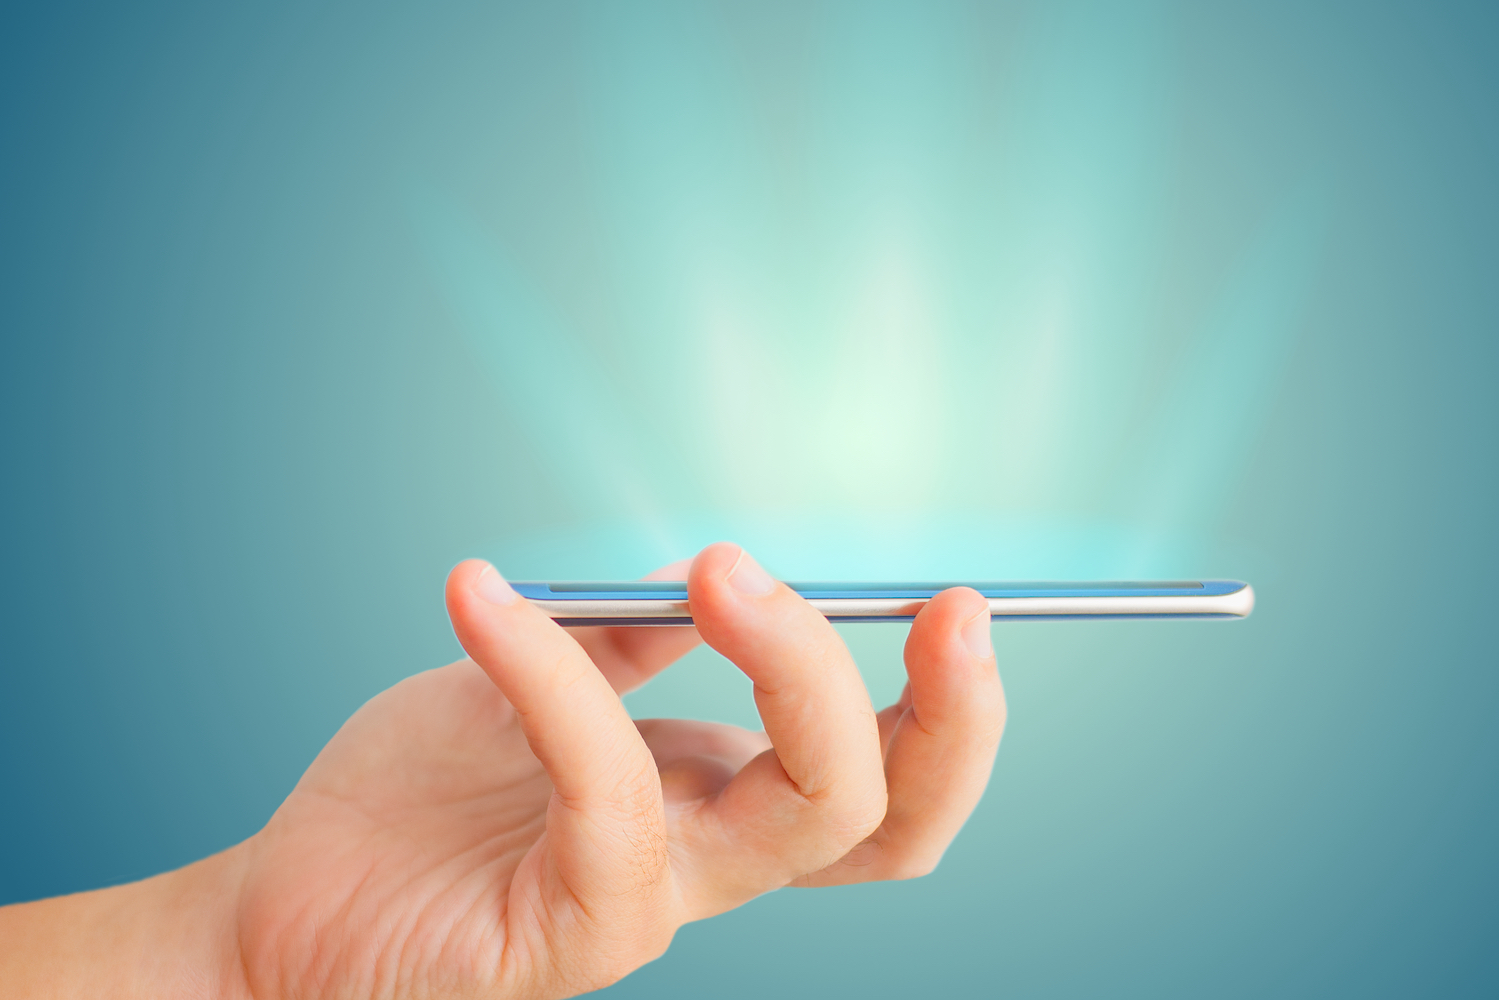 Human hand holding a smart phone horizontally against a blue background